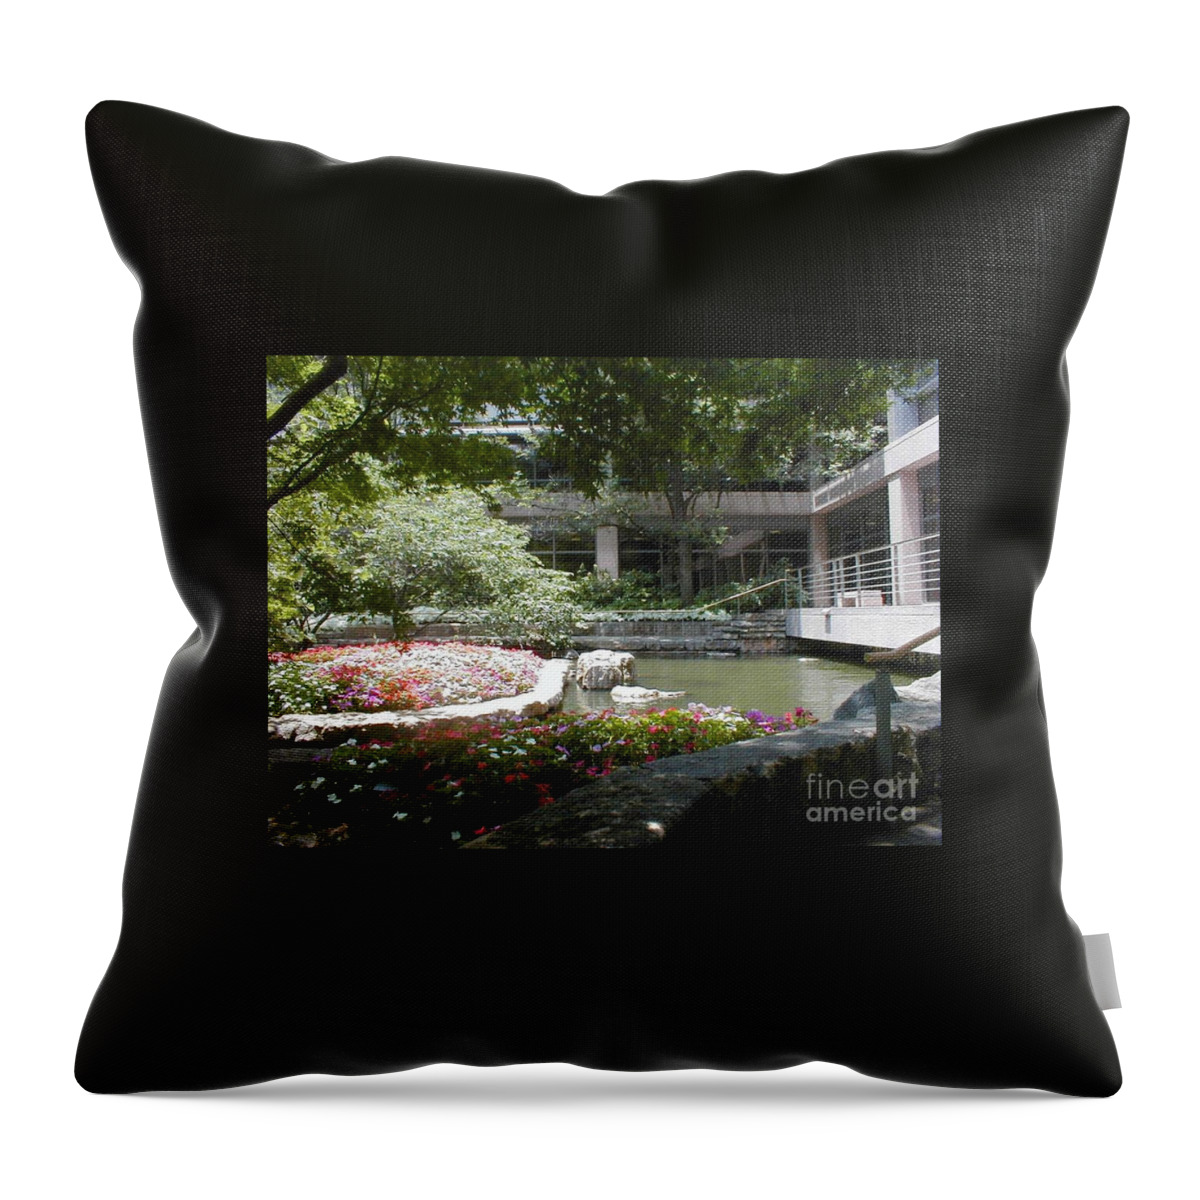 Courtyards Throw Pillow featuring the photograph Inner Courtyard by Vonda Lawson-Rosa